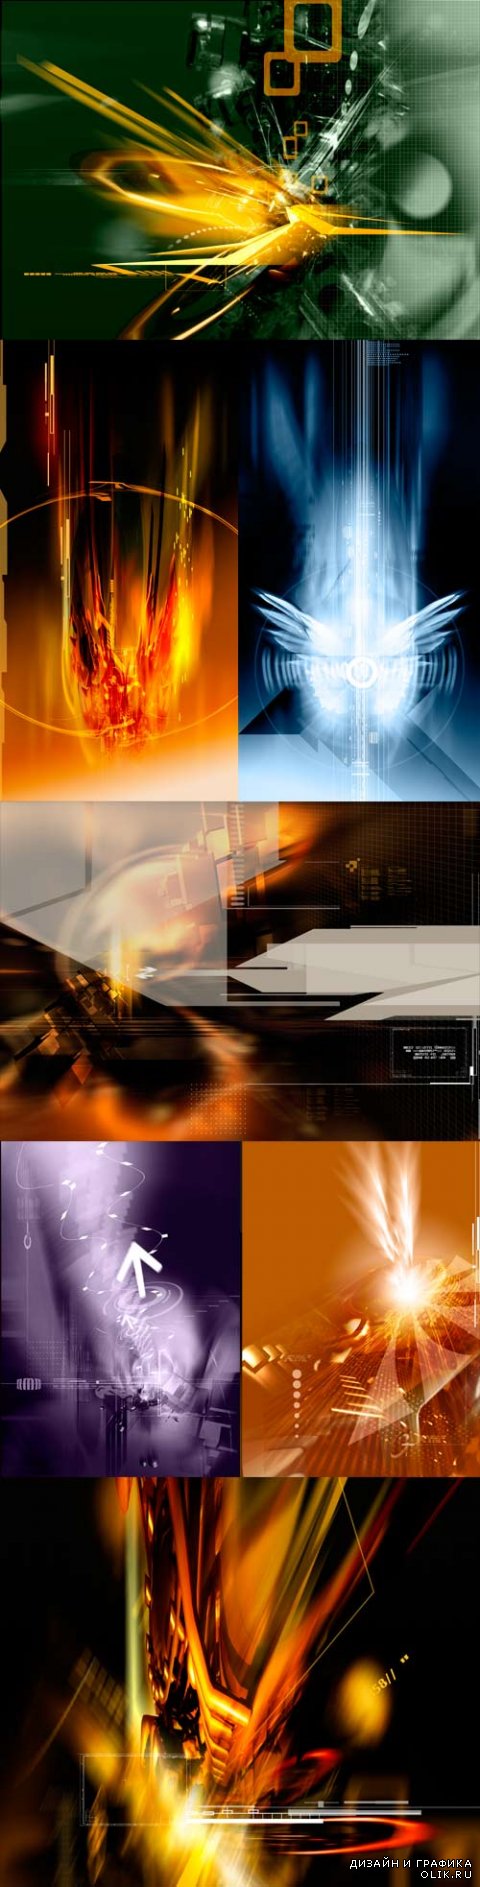 Multifokus abstract backgrounds PSD - 2